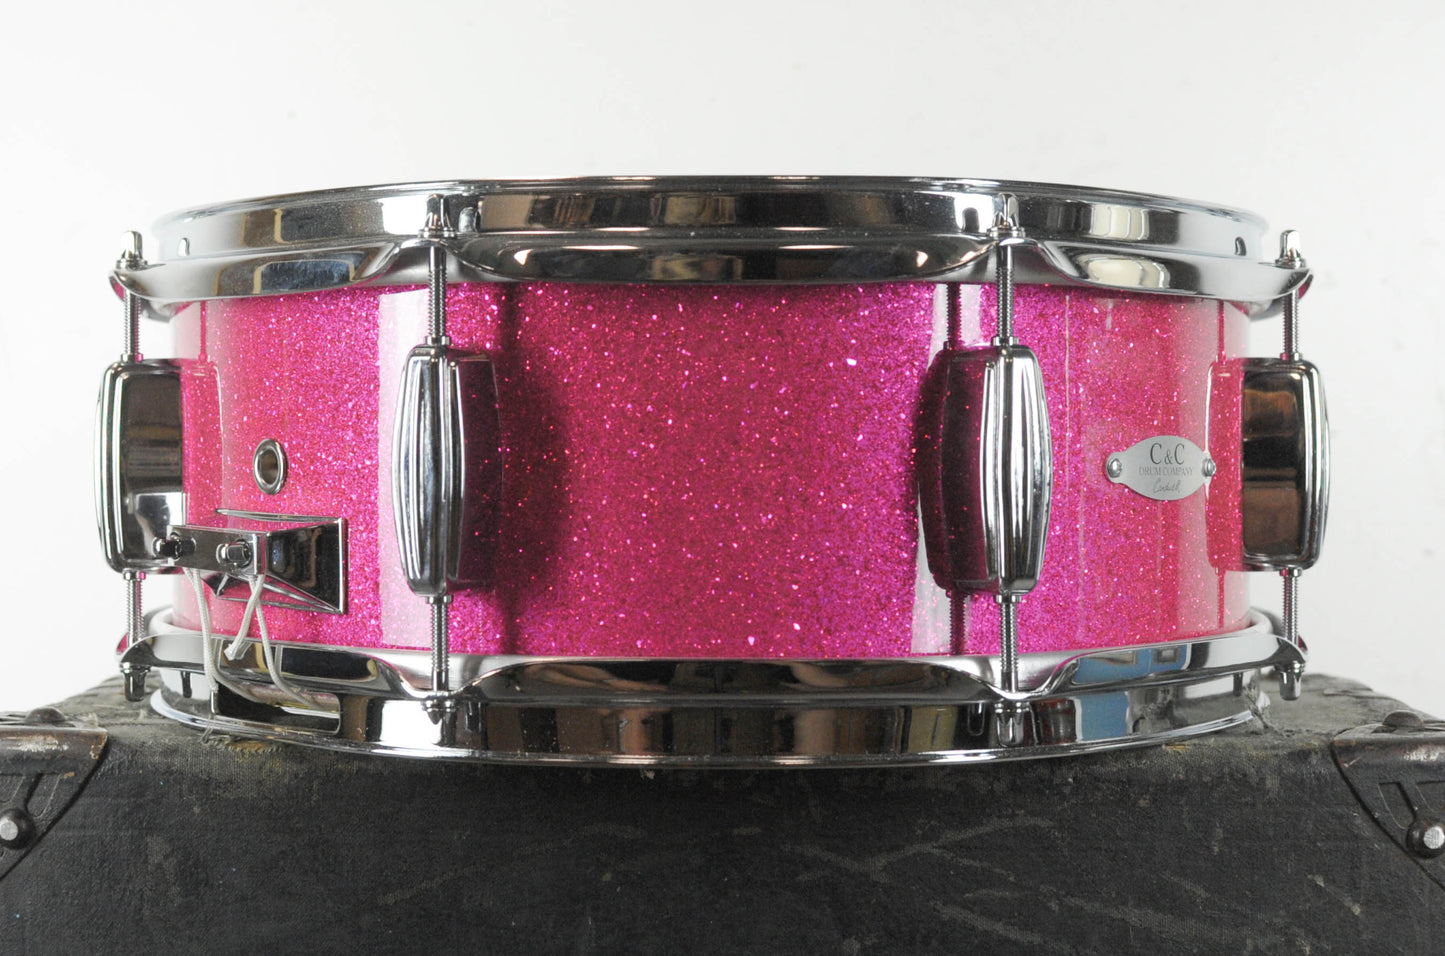 C&C Drum Co 5.5x14 Player Date I "Pink Candy Crush" Snare Drum